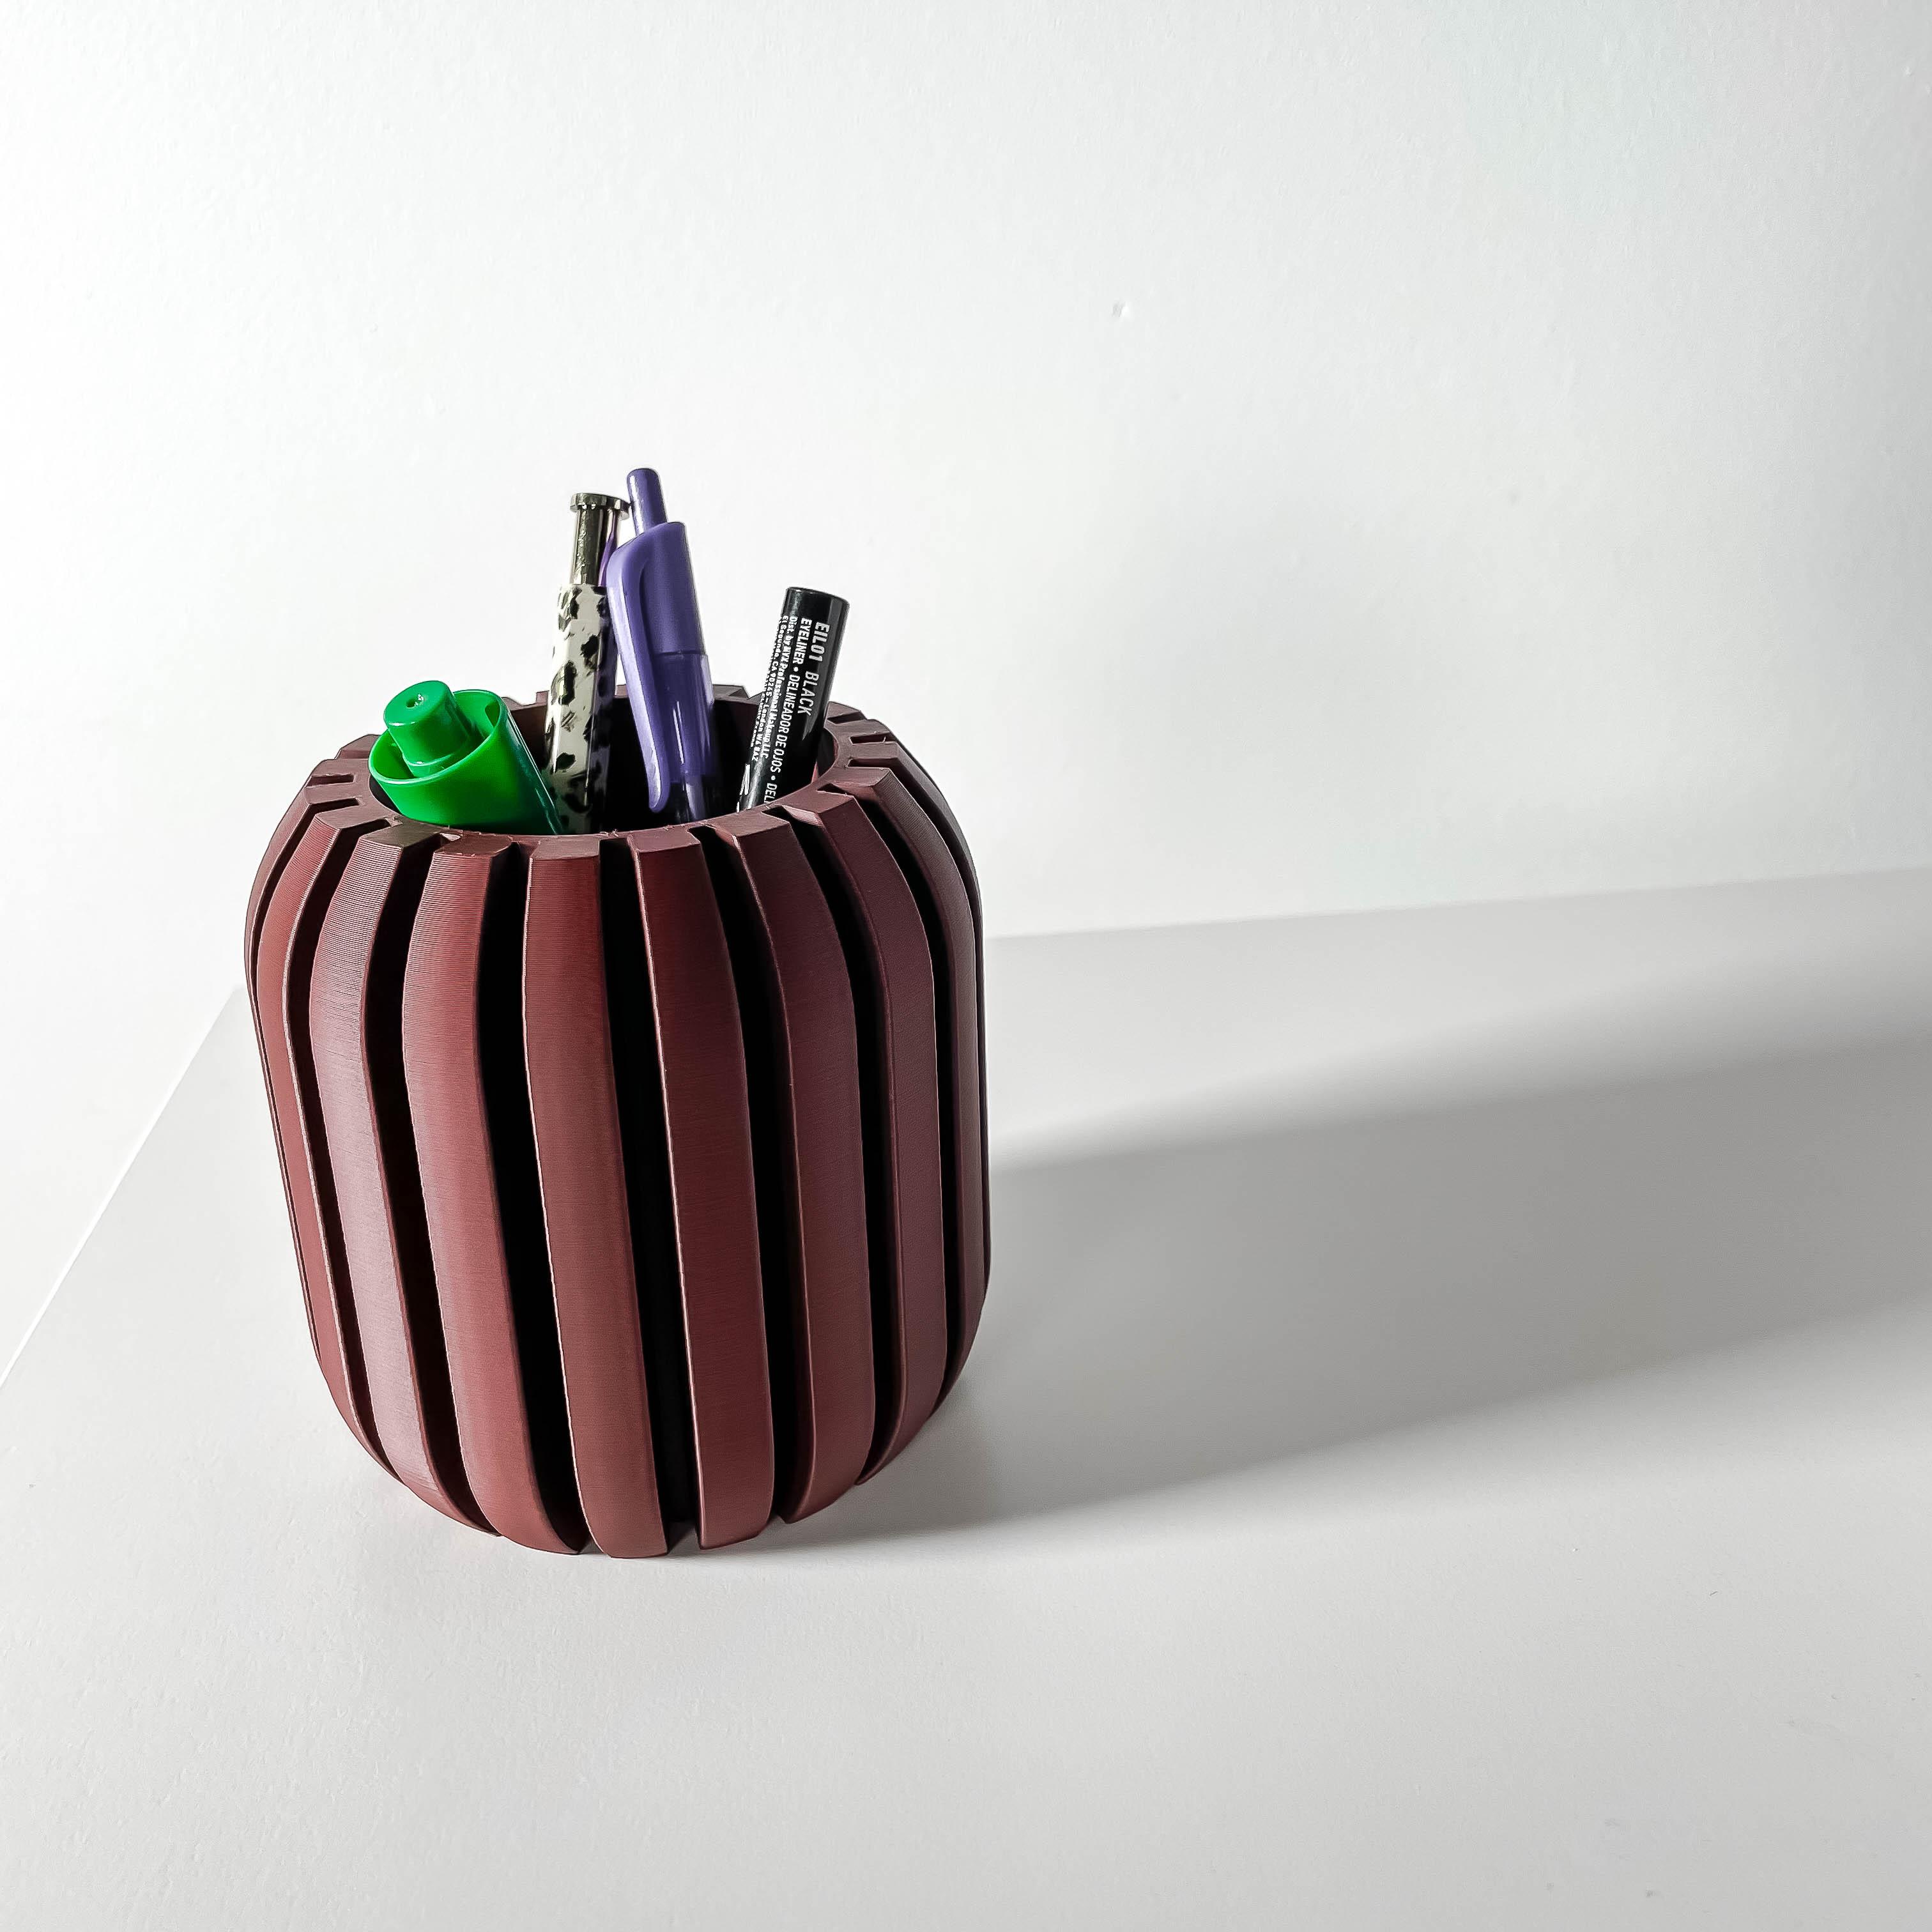 The Unra Pen Holder | Desk Organizer and Pencil Cup Holder | Modern Office and Home Decor 3d model